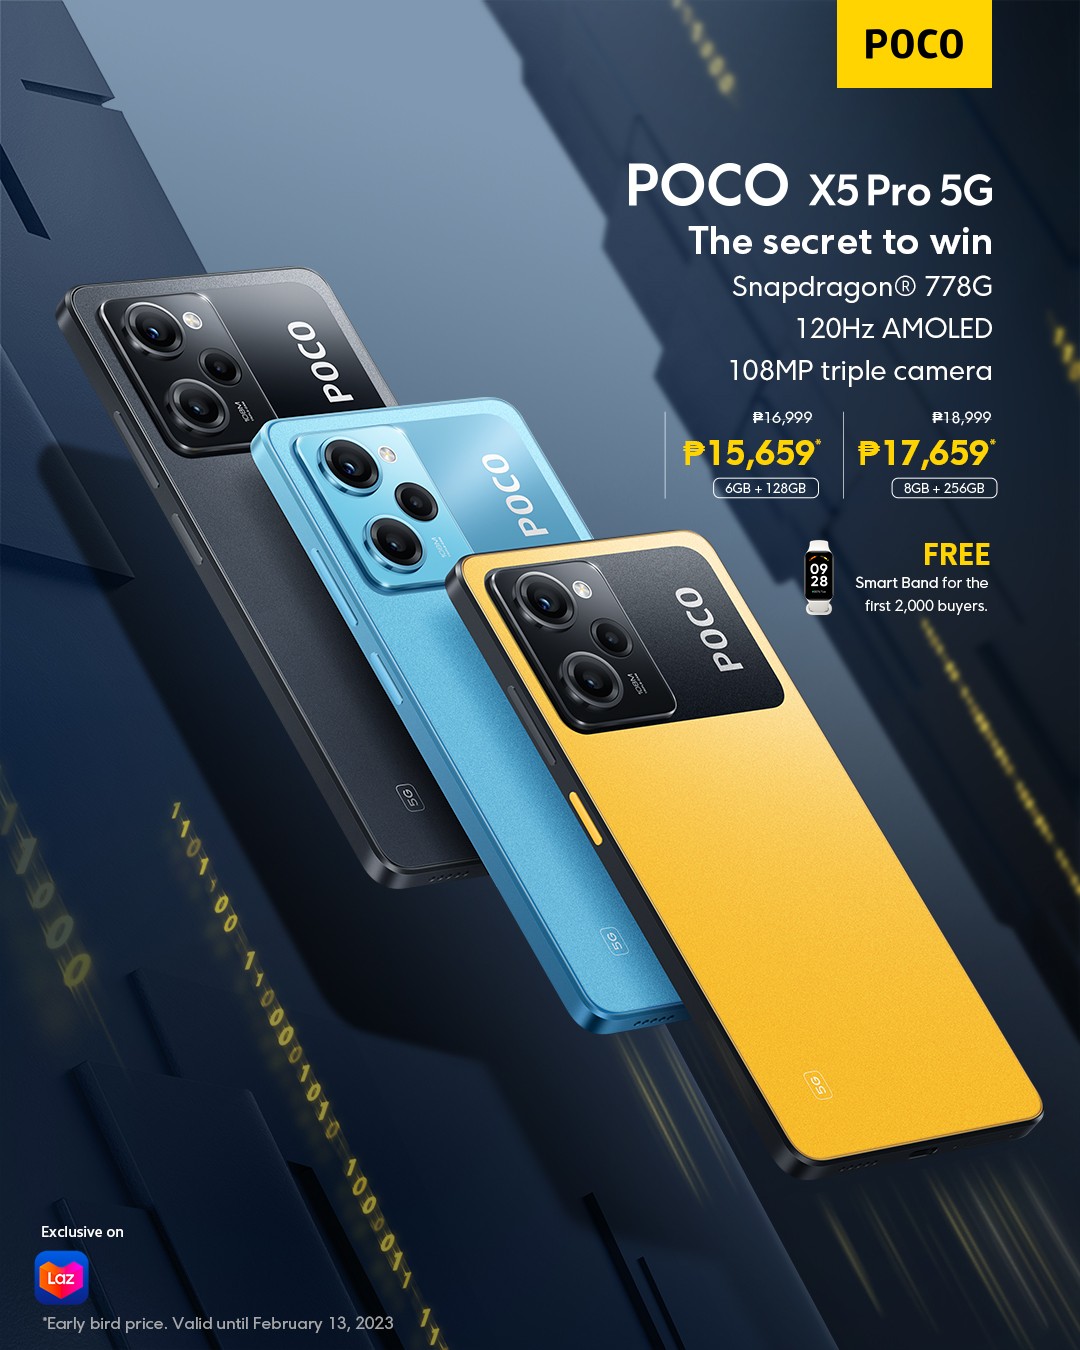 POCO X5 Pro 5G, X5 5G price and availability in the Philippines